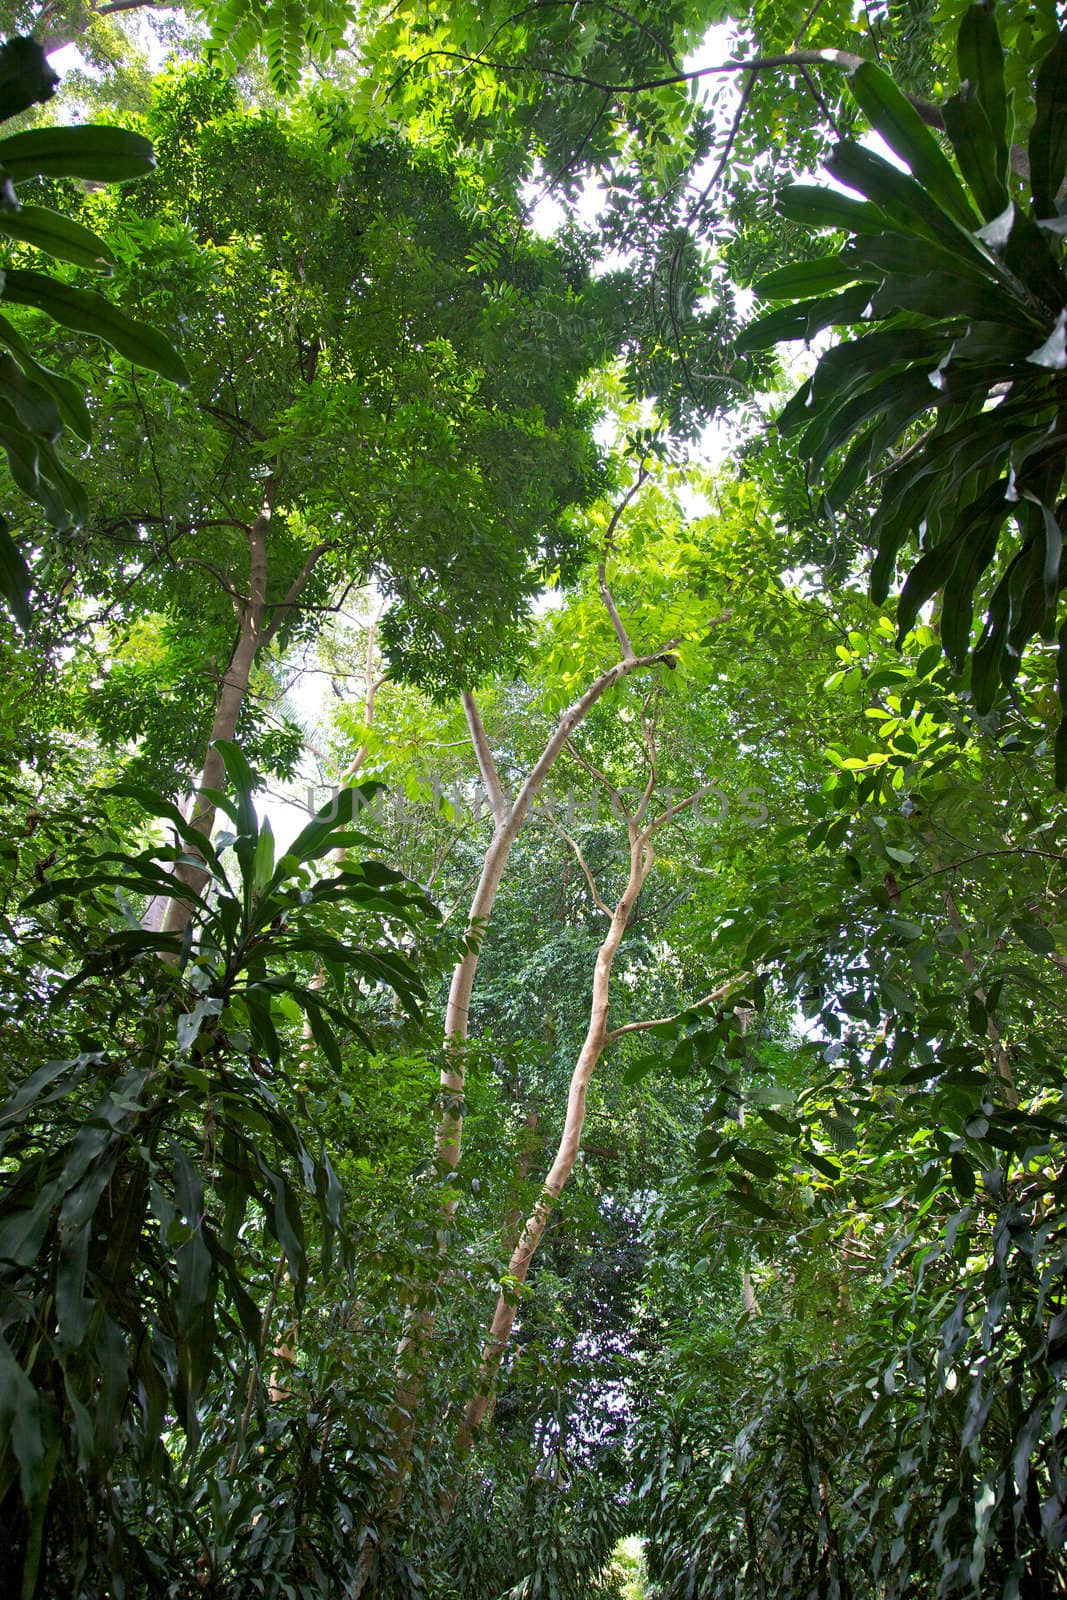 A detail of the rainforest in Singapore Botanic Gardens.